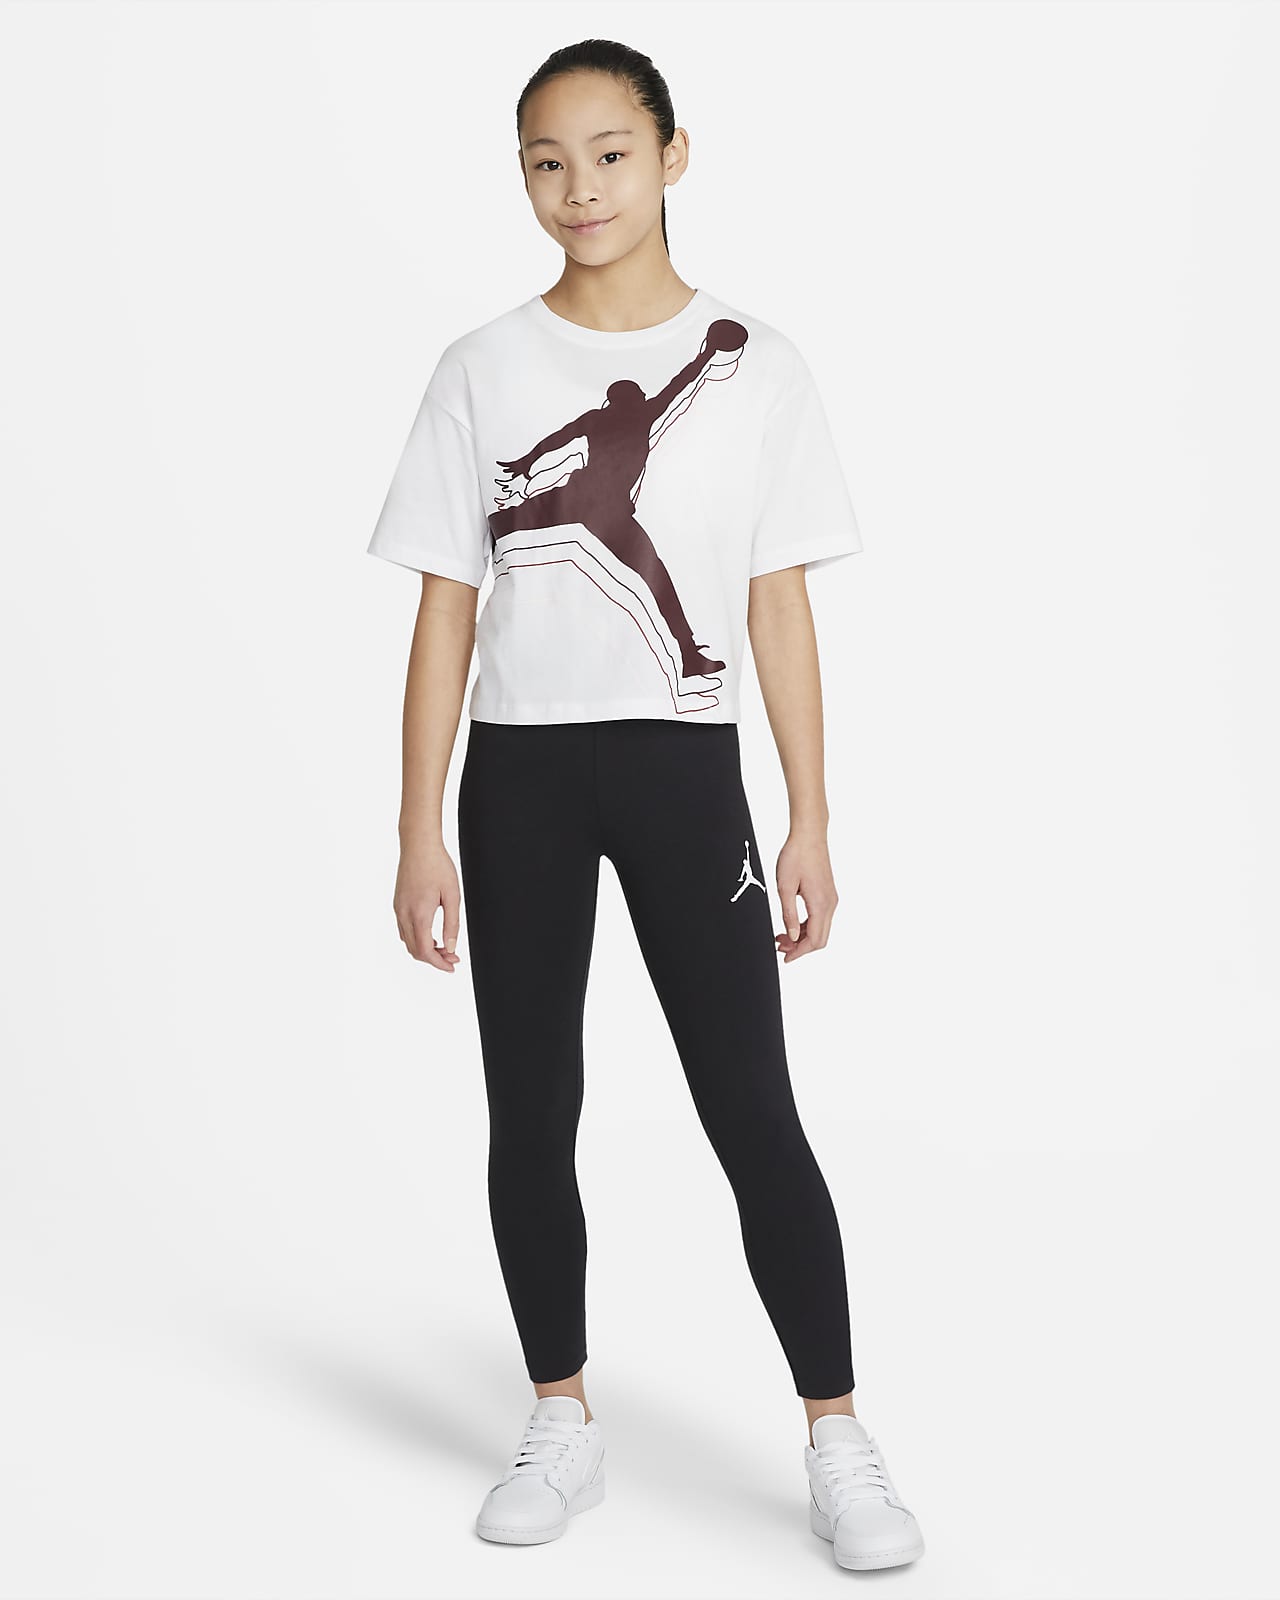 girl sweatpants outfit nike